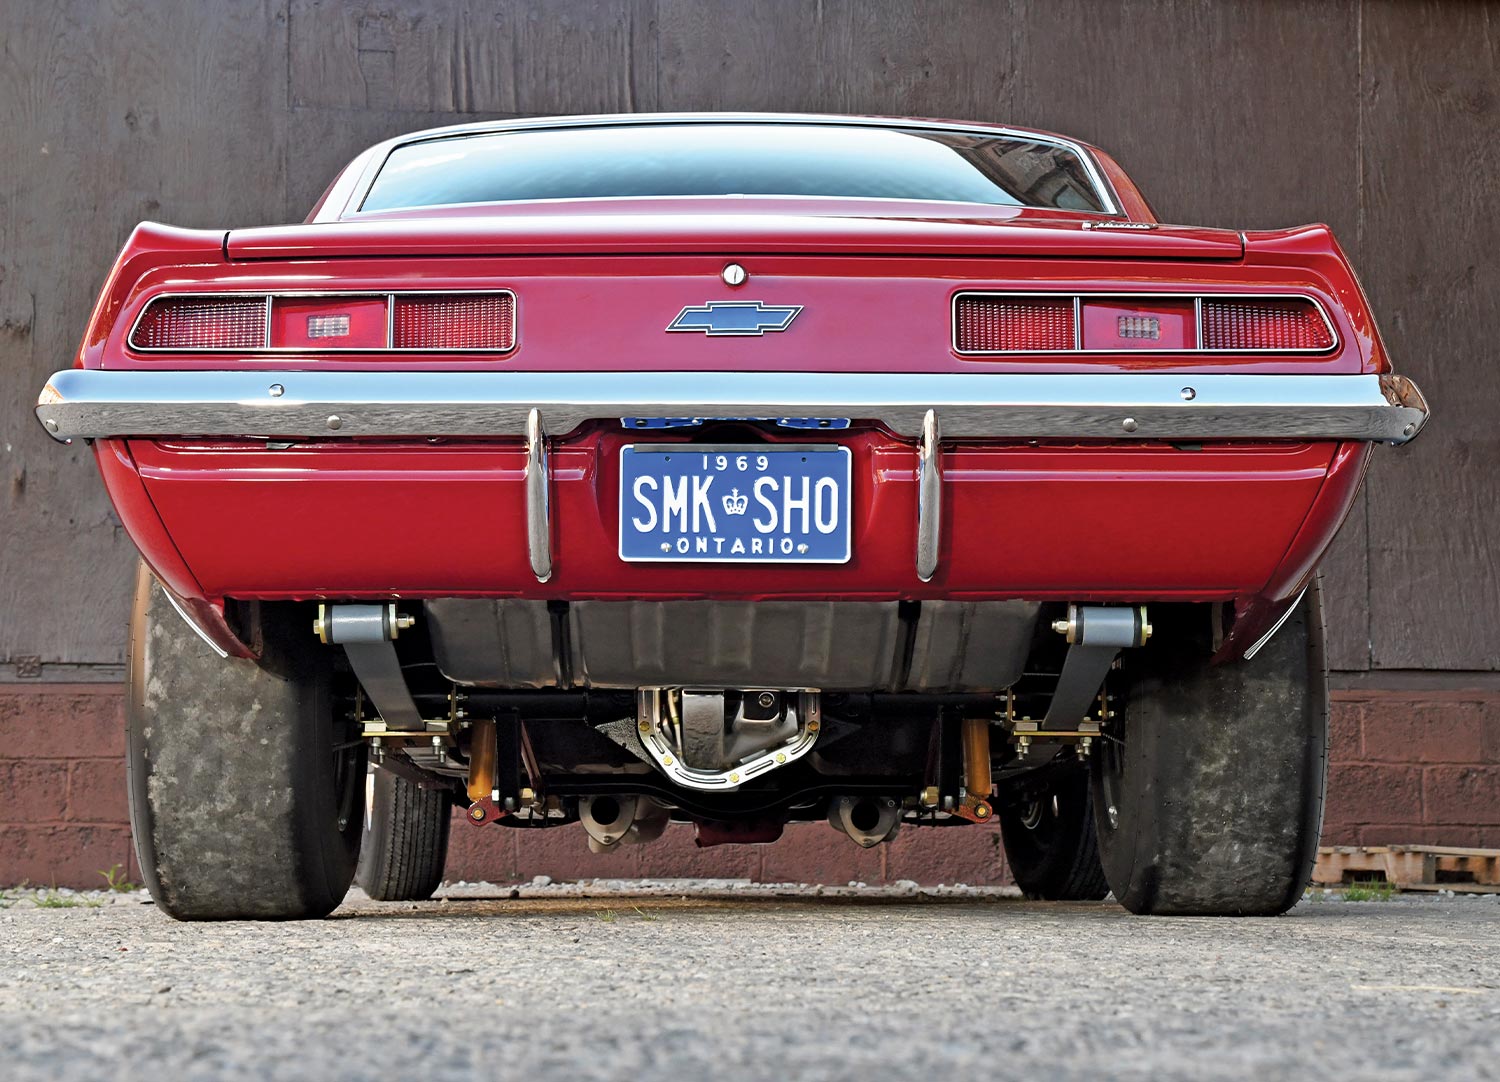 rear view of the ’69 Garnet Red COPO Camaro